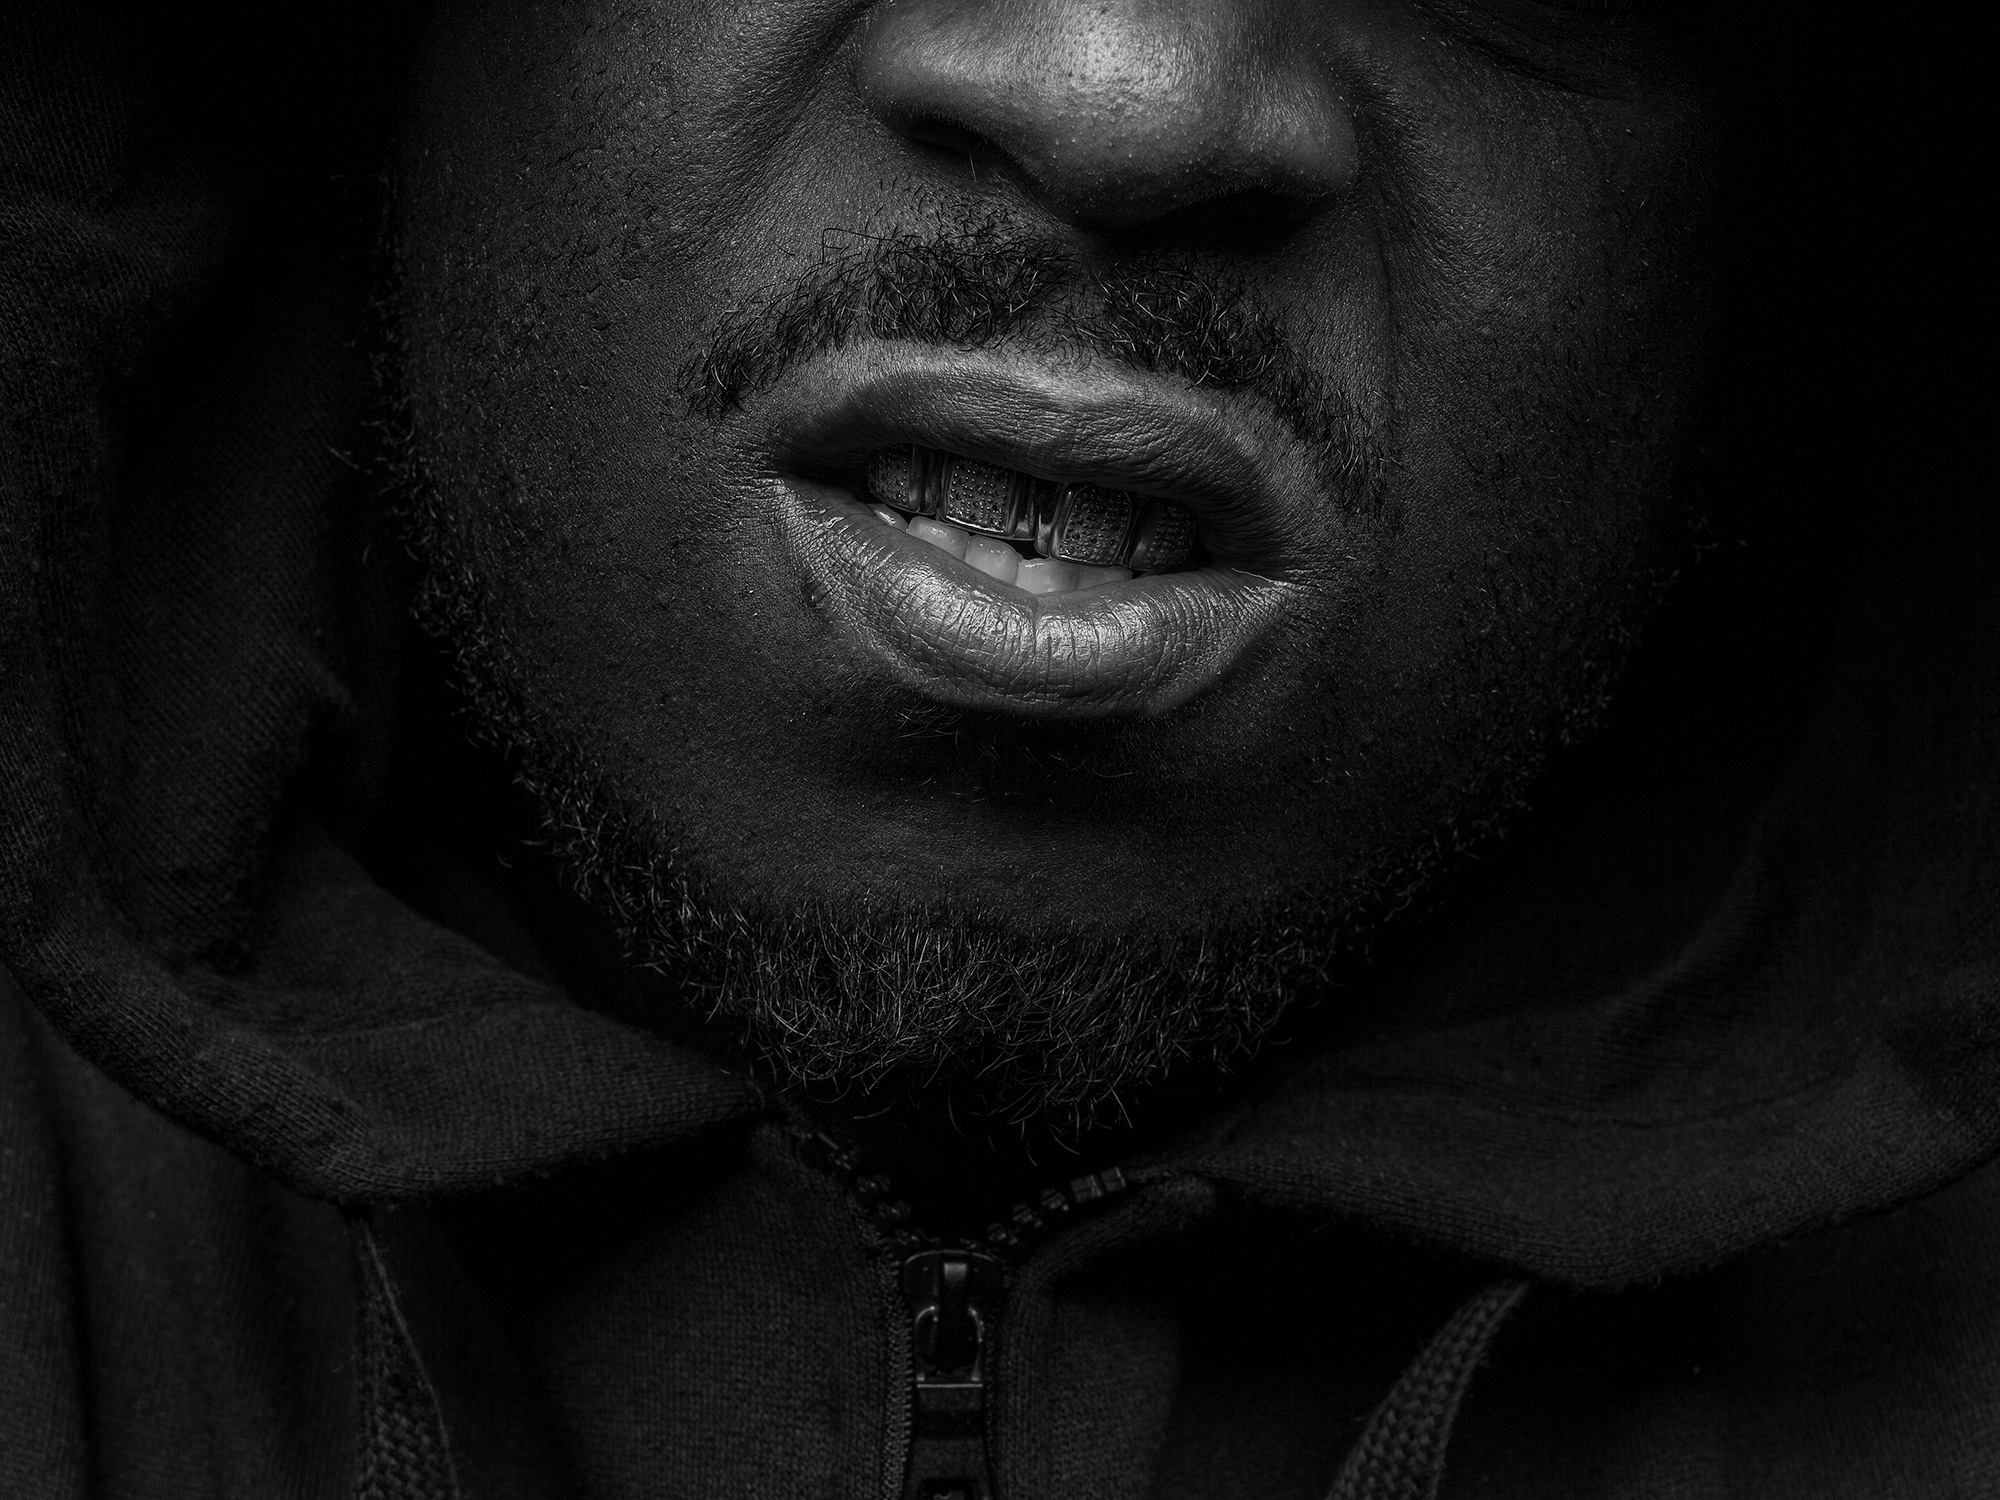 Spank D, member of ABN crew, shows off his grill in Houston, Texas, photographed by Houston photographer, Todd Spoth.